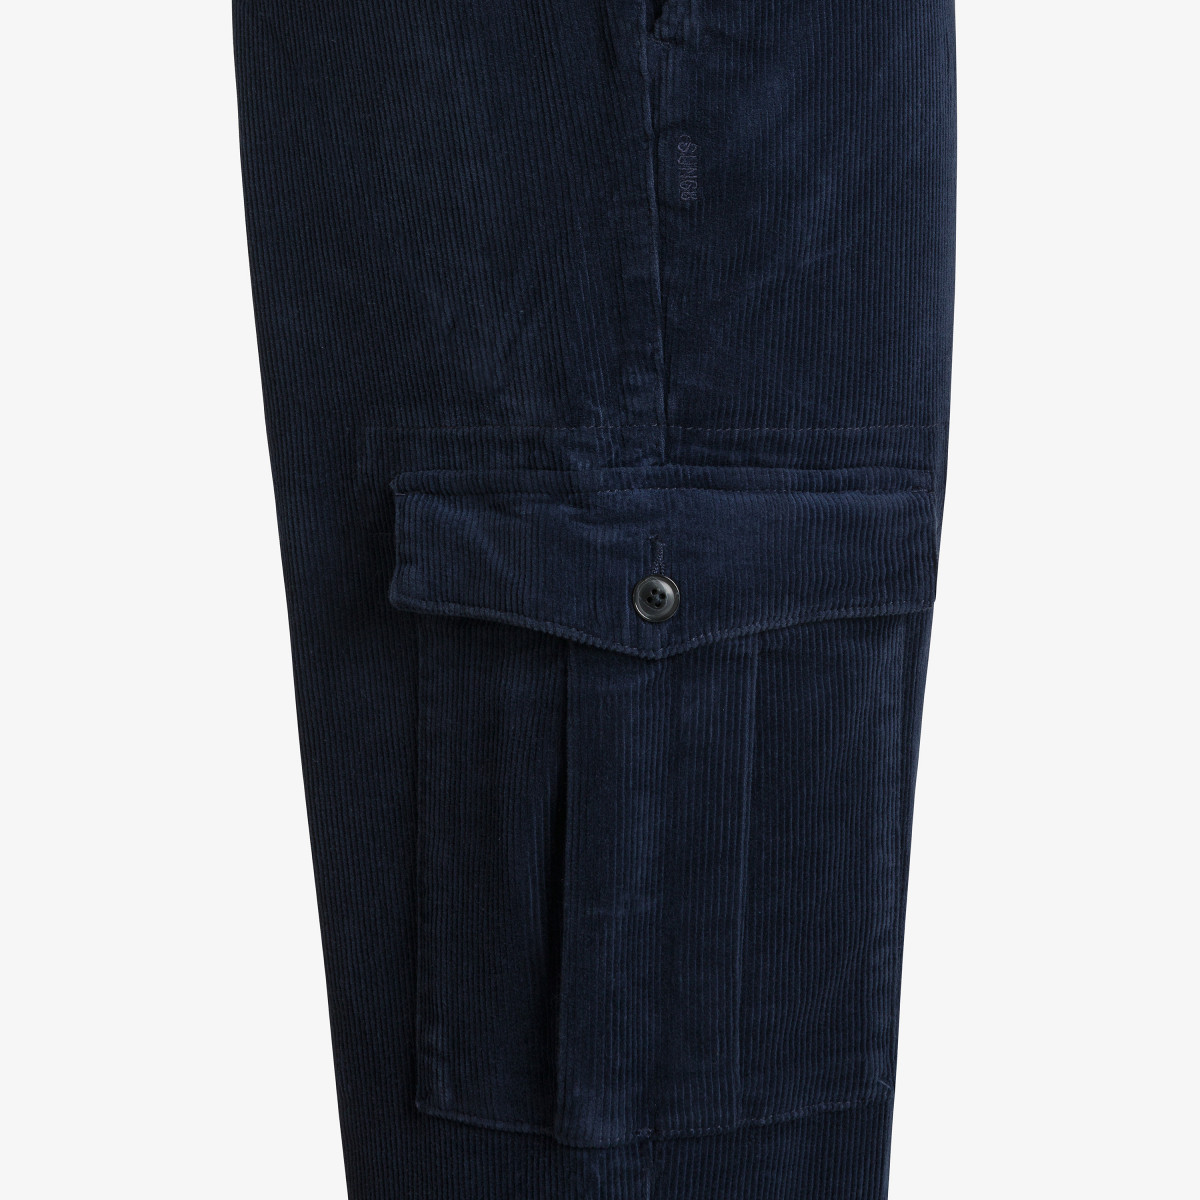 PANT MILITARY NAVY BLUE